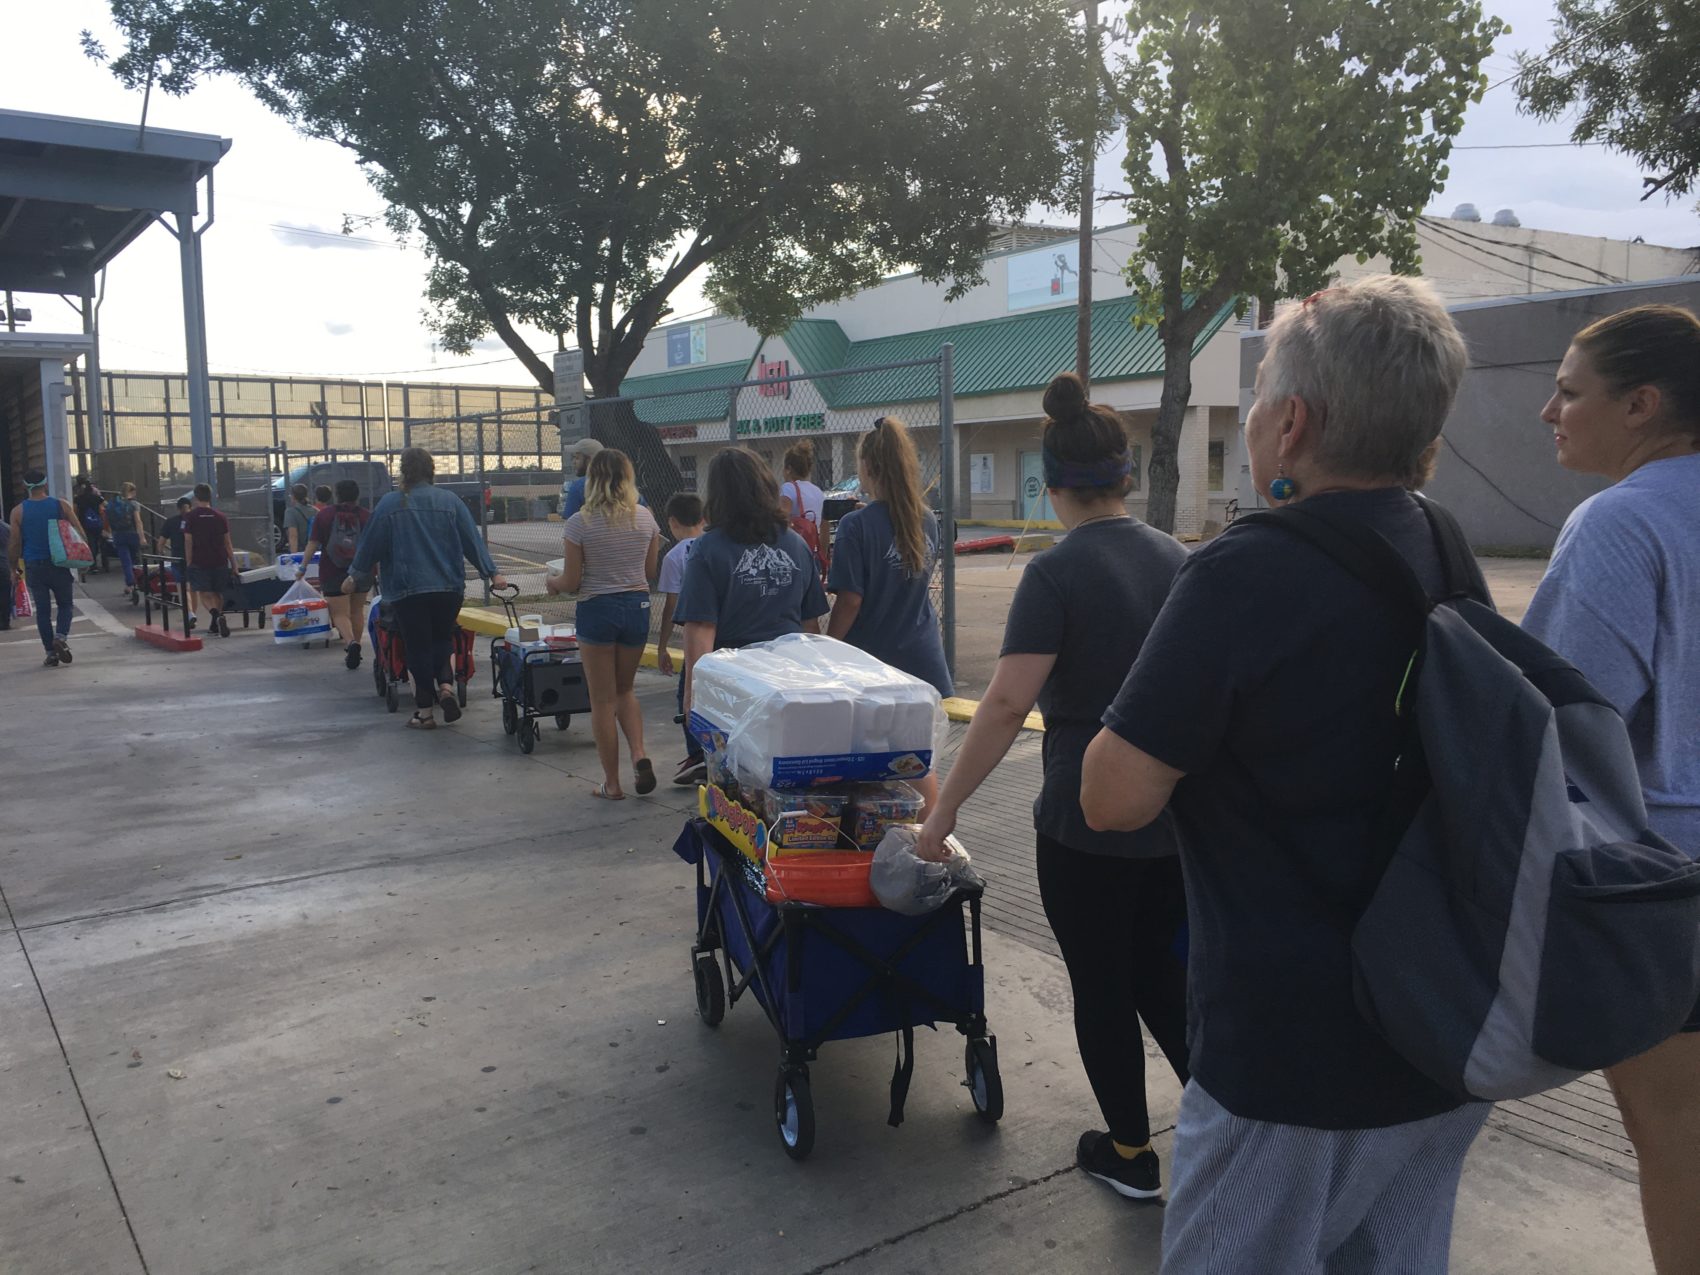 Volunteers with Team Brownsville pull wagons filled with food, water, and other supplies to Matamoros, Mexico.